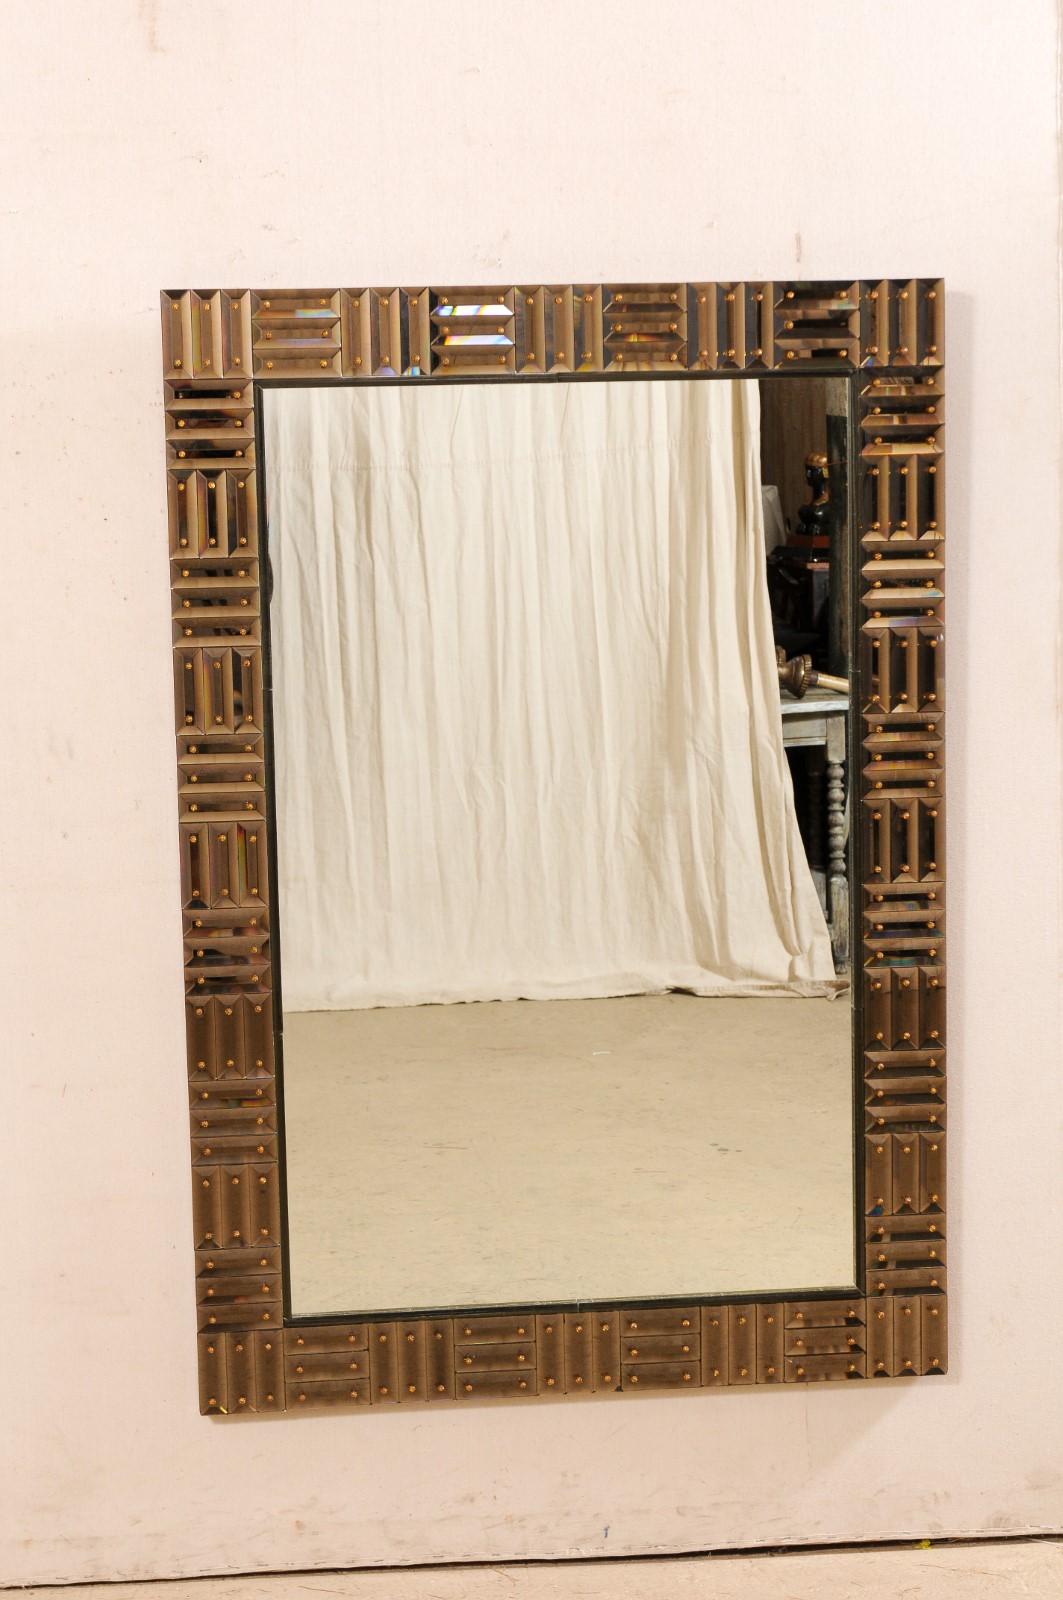 An Italian-made Duca mirror from luxury home furnishings maker/designer Donghia. This Venetian glass mirror from Italy is rectangular-shaped with a thickly bordered surround in smoky amber glass pieces (rectangular shaped pieces in sets of three